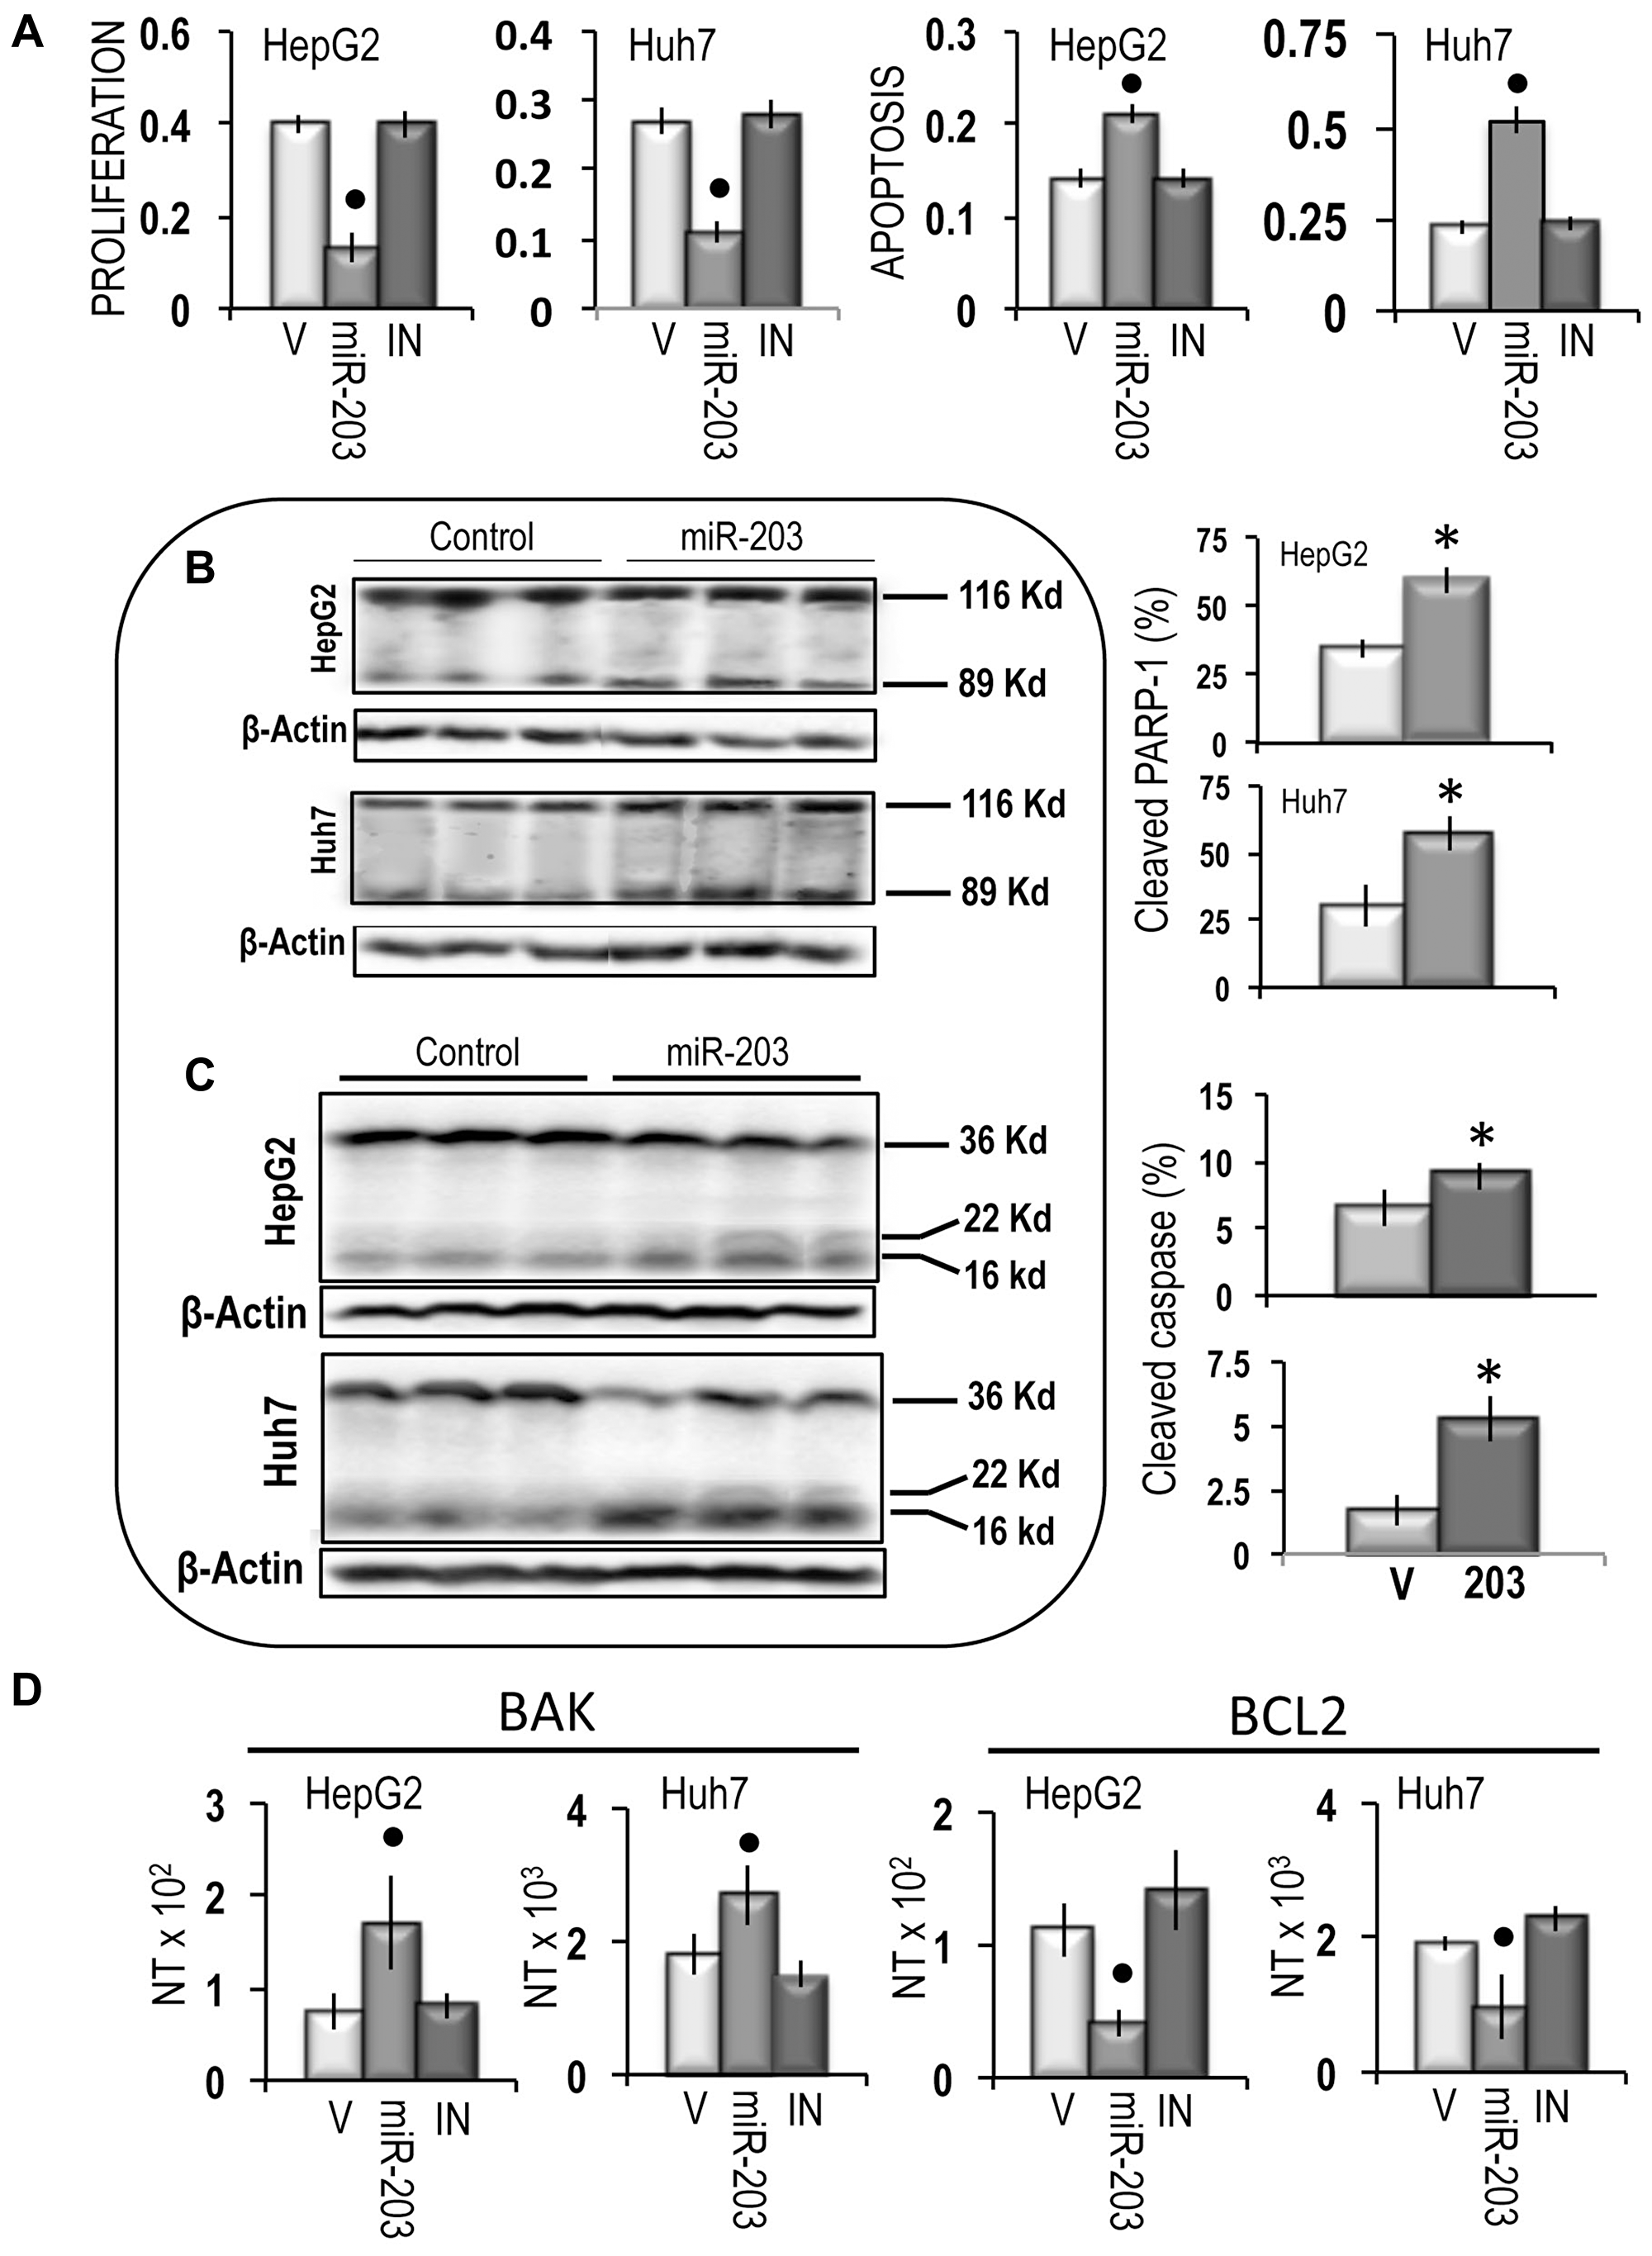 Apoptogenic effect of miR-203 on HepG2 and Huh7 cells.